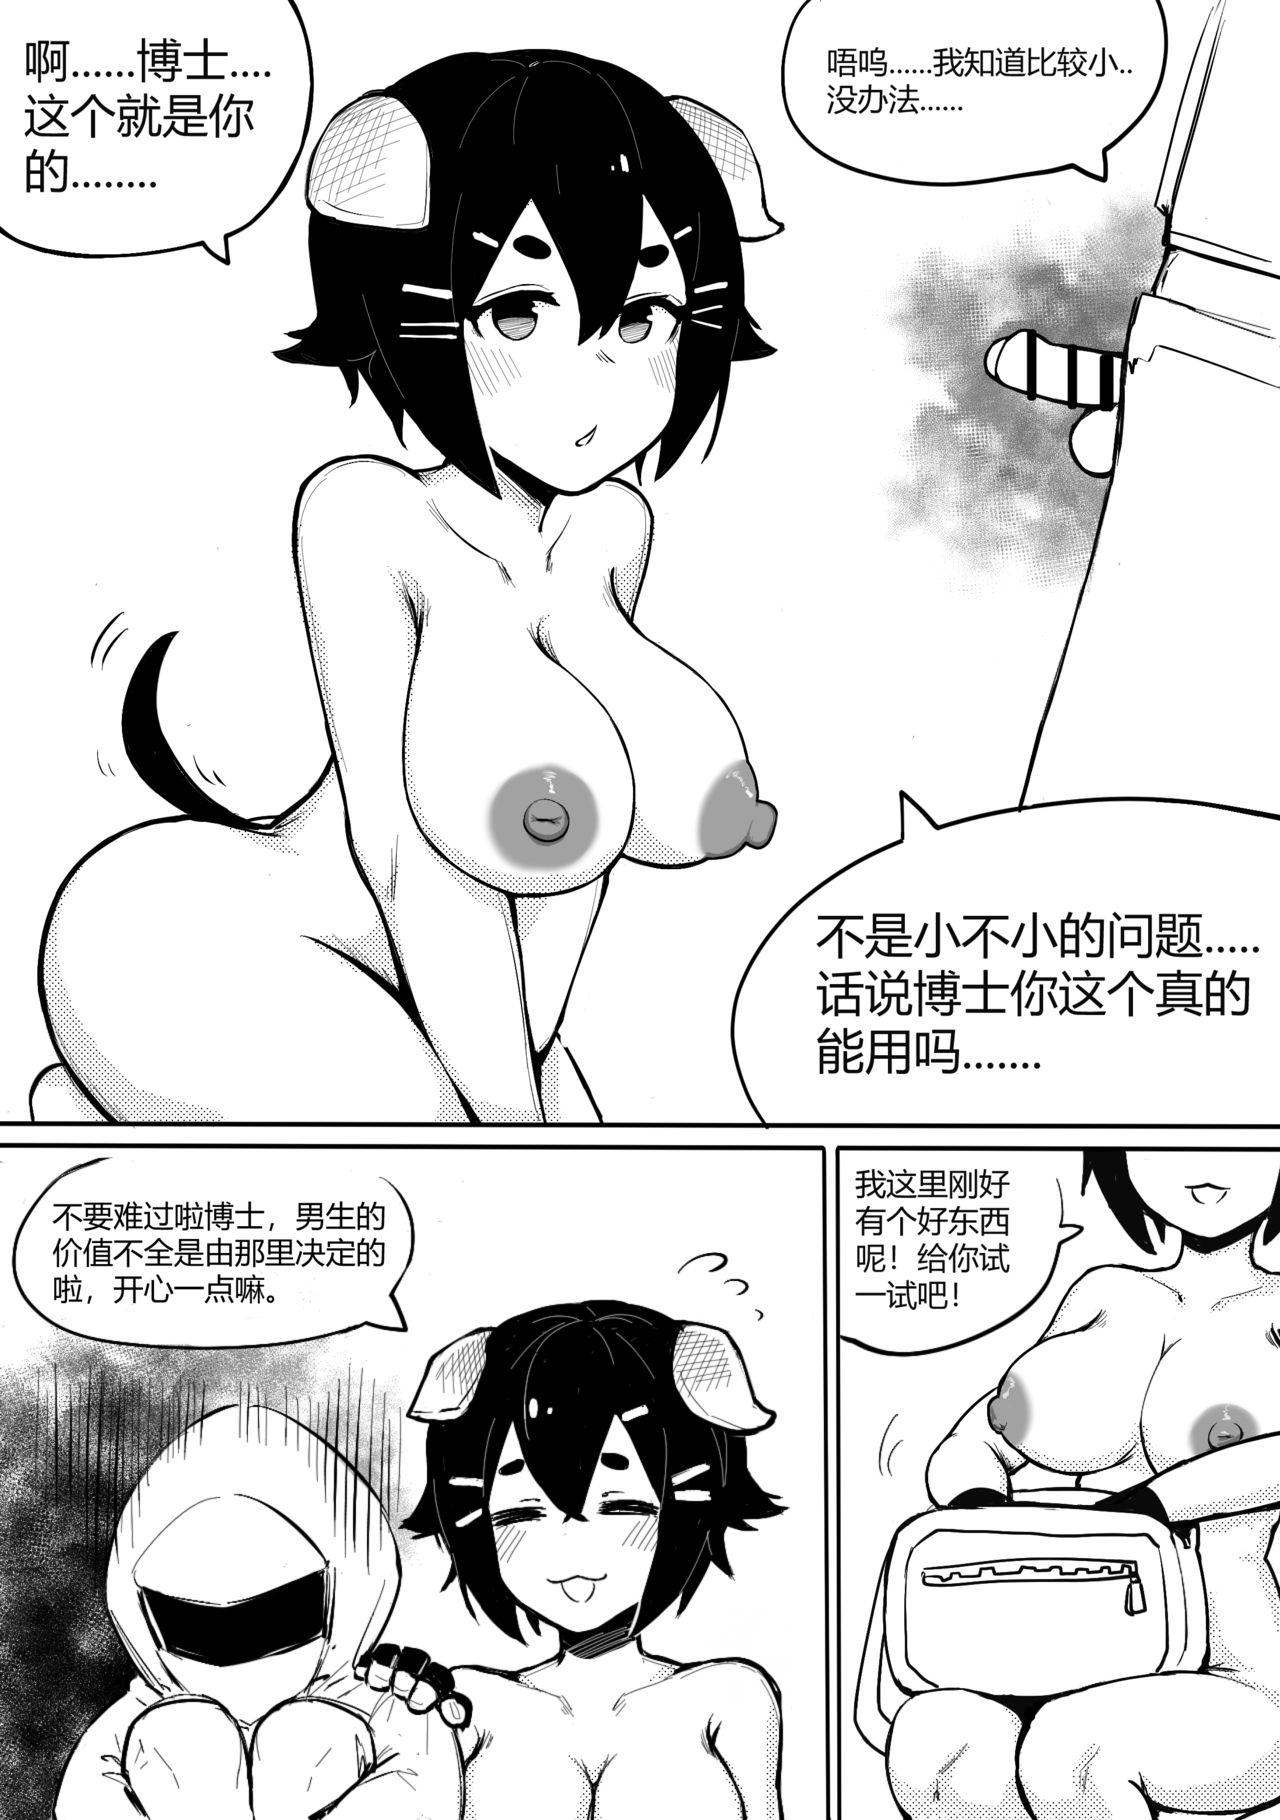 Tanned 可爱的杰克【9P】（Arknights） - Arknights Joven - Page 3